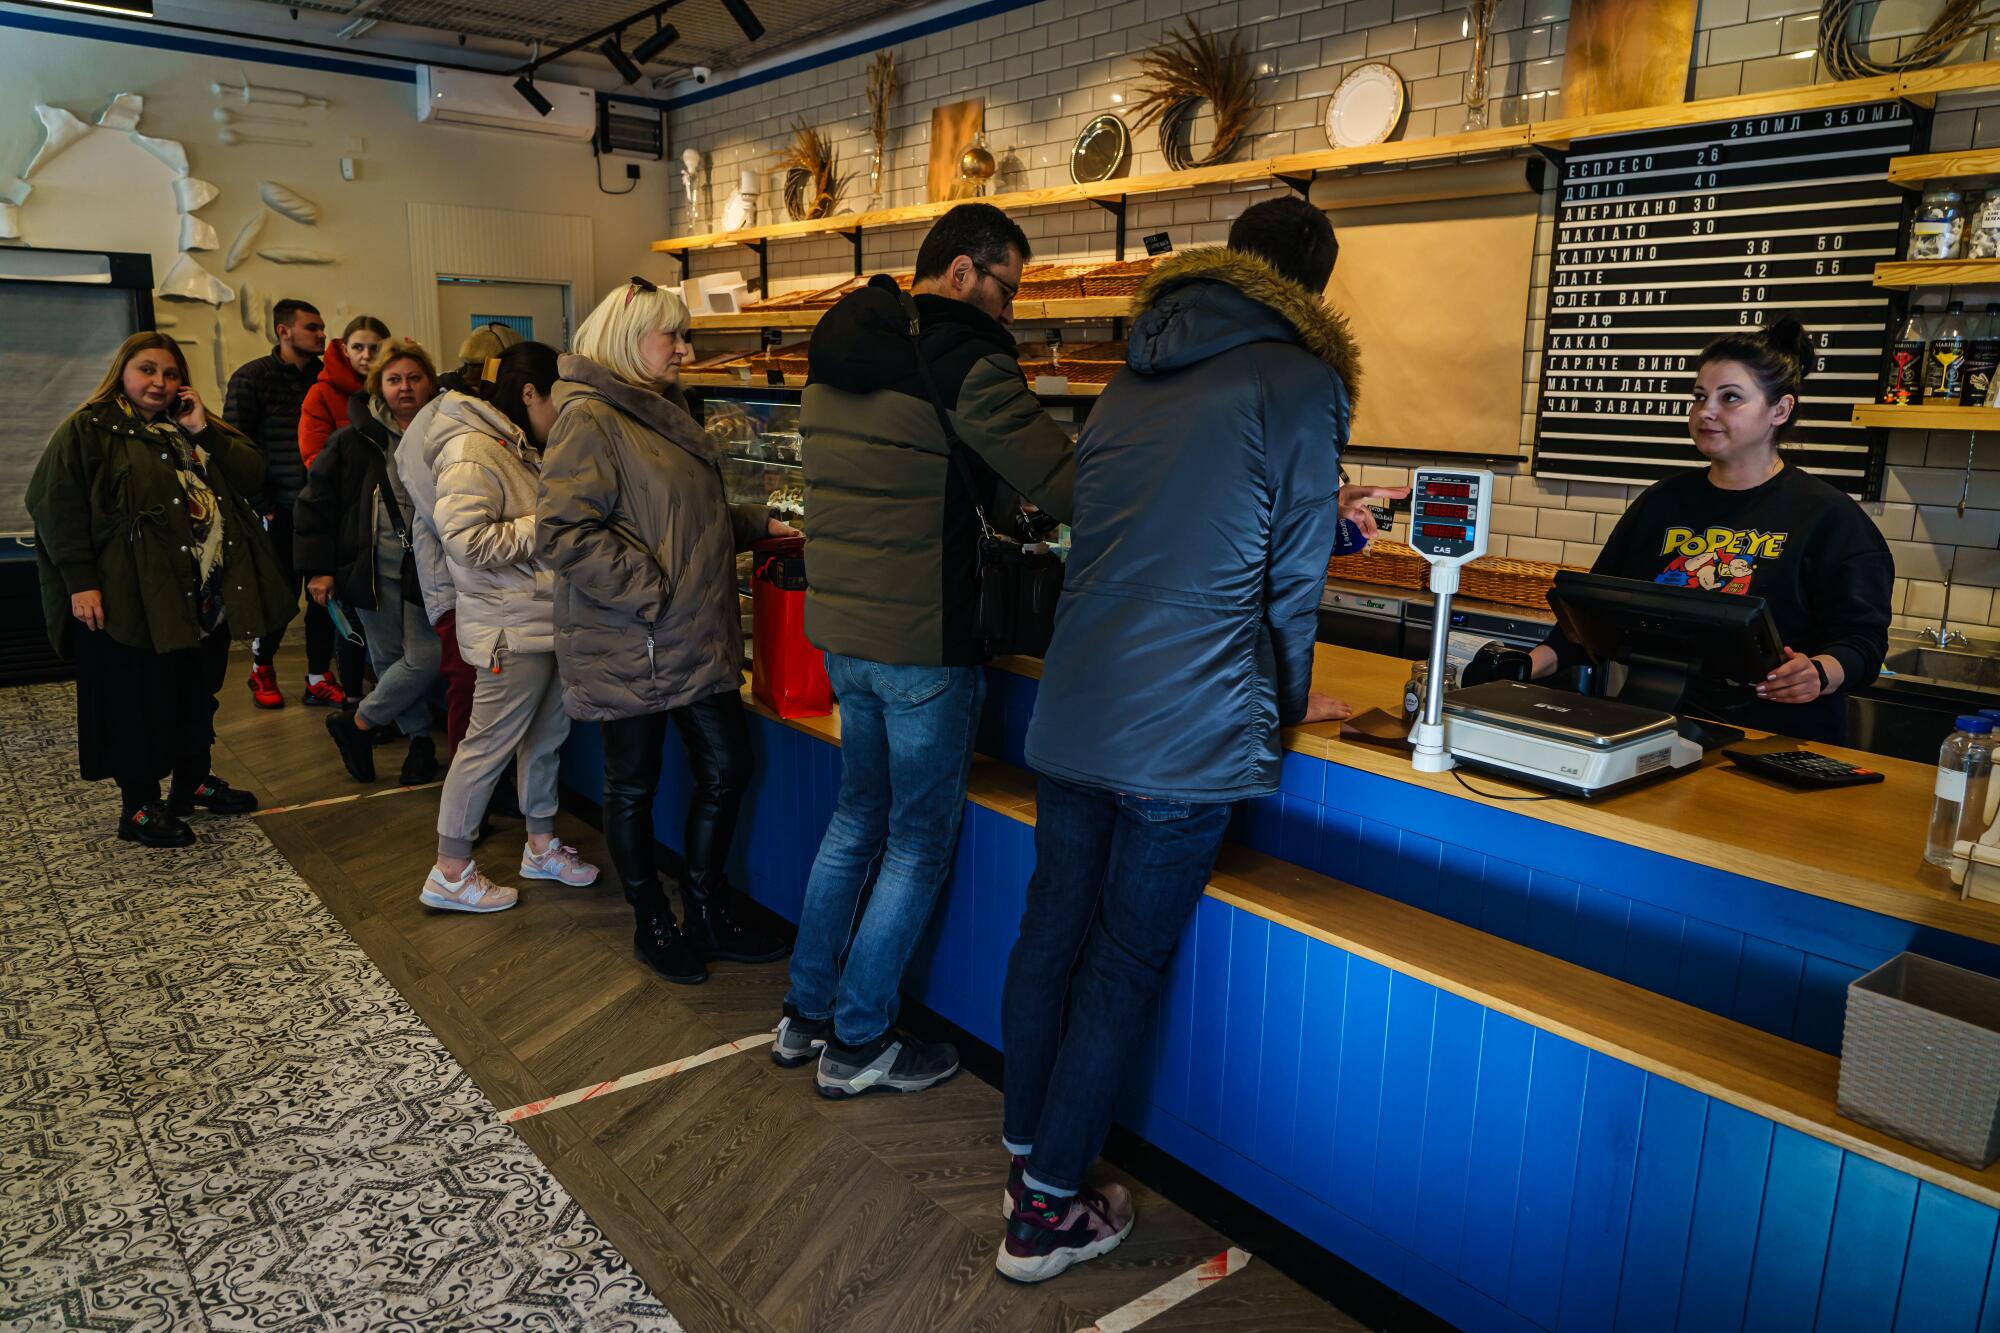 Customers in coats wait at a pastry shop.